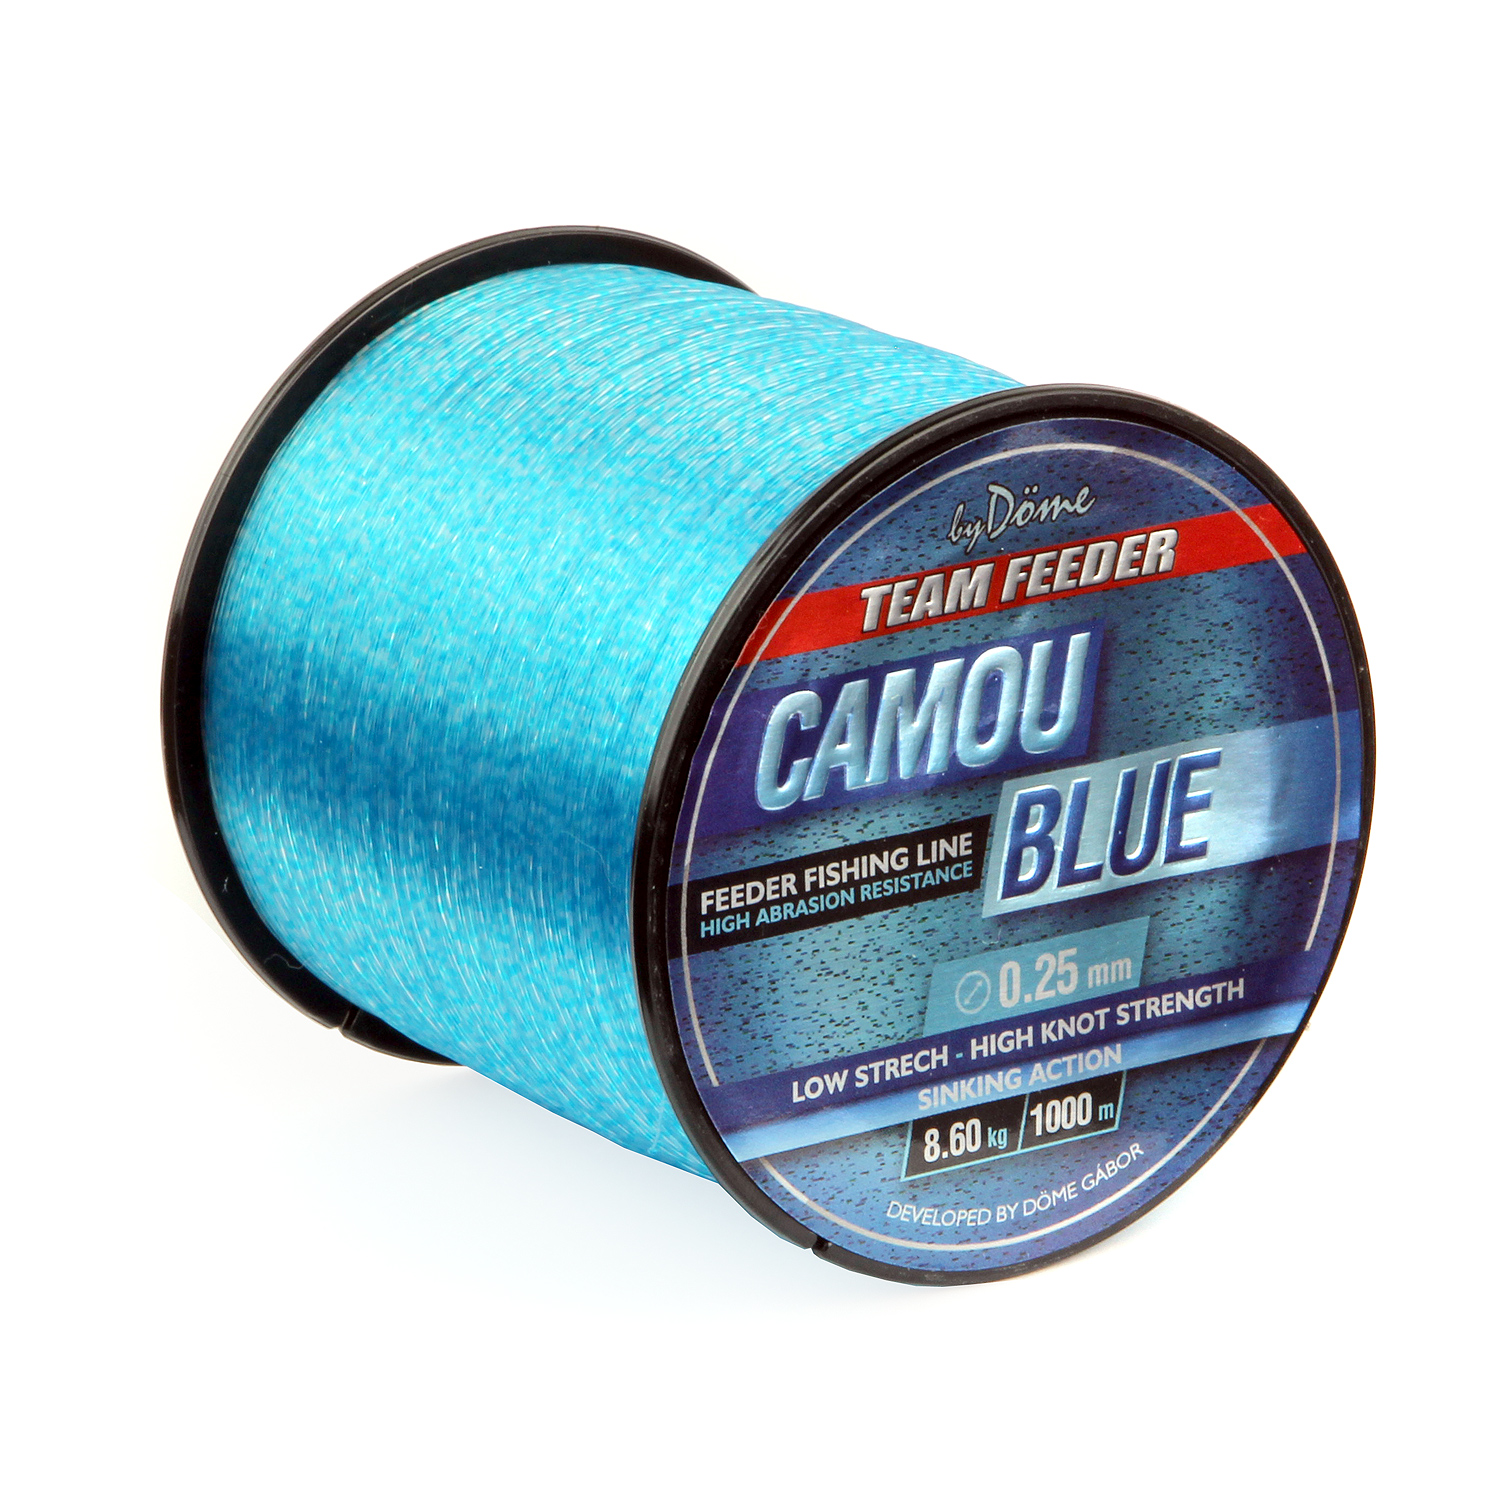 By Dme TF Camou Blue 1000m 0.35mm